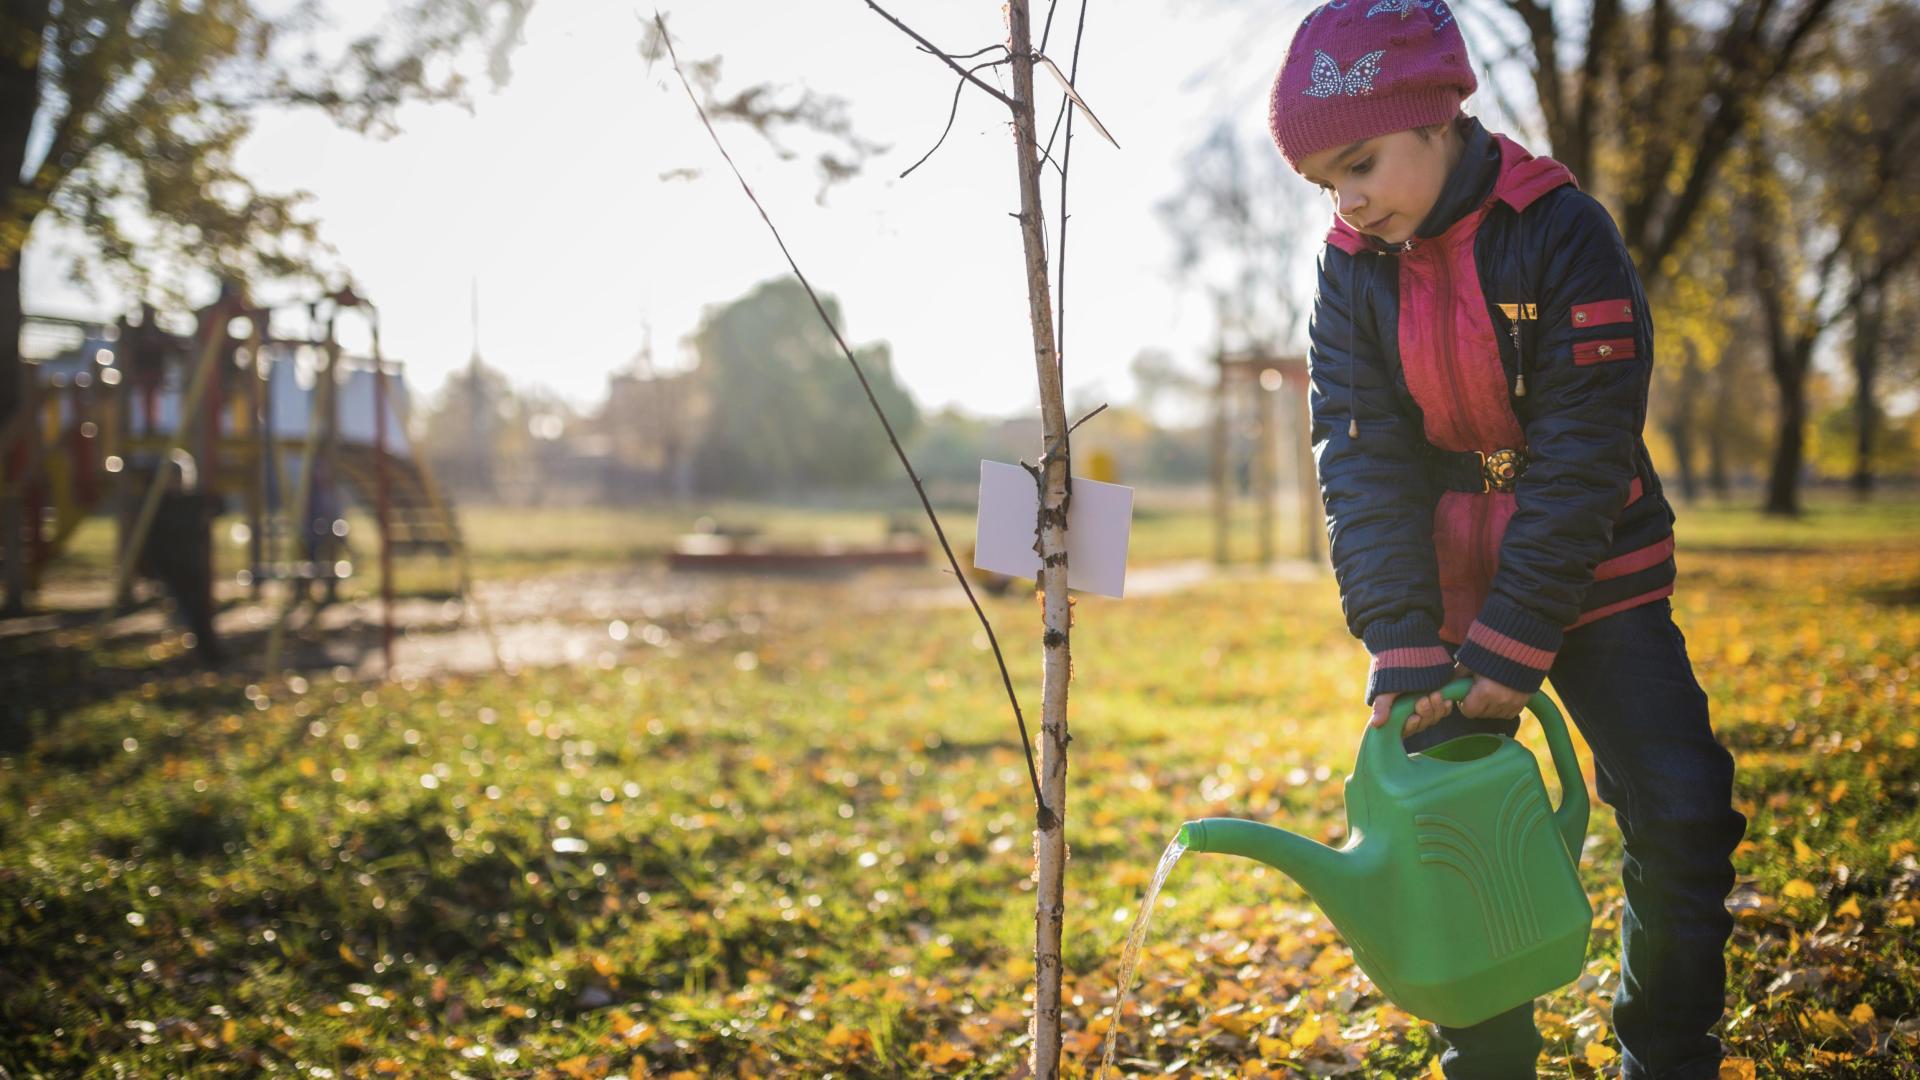 A newly planted tree is watered by a child